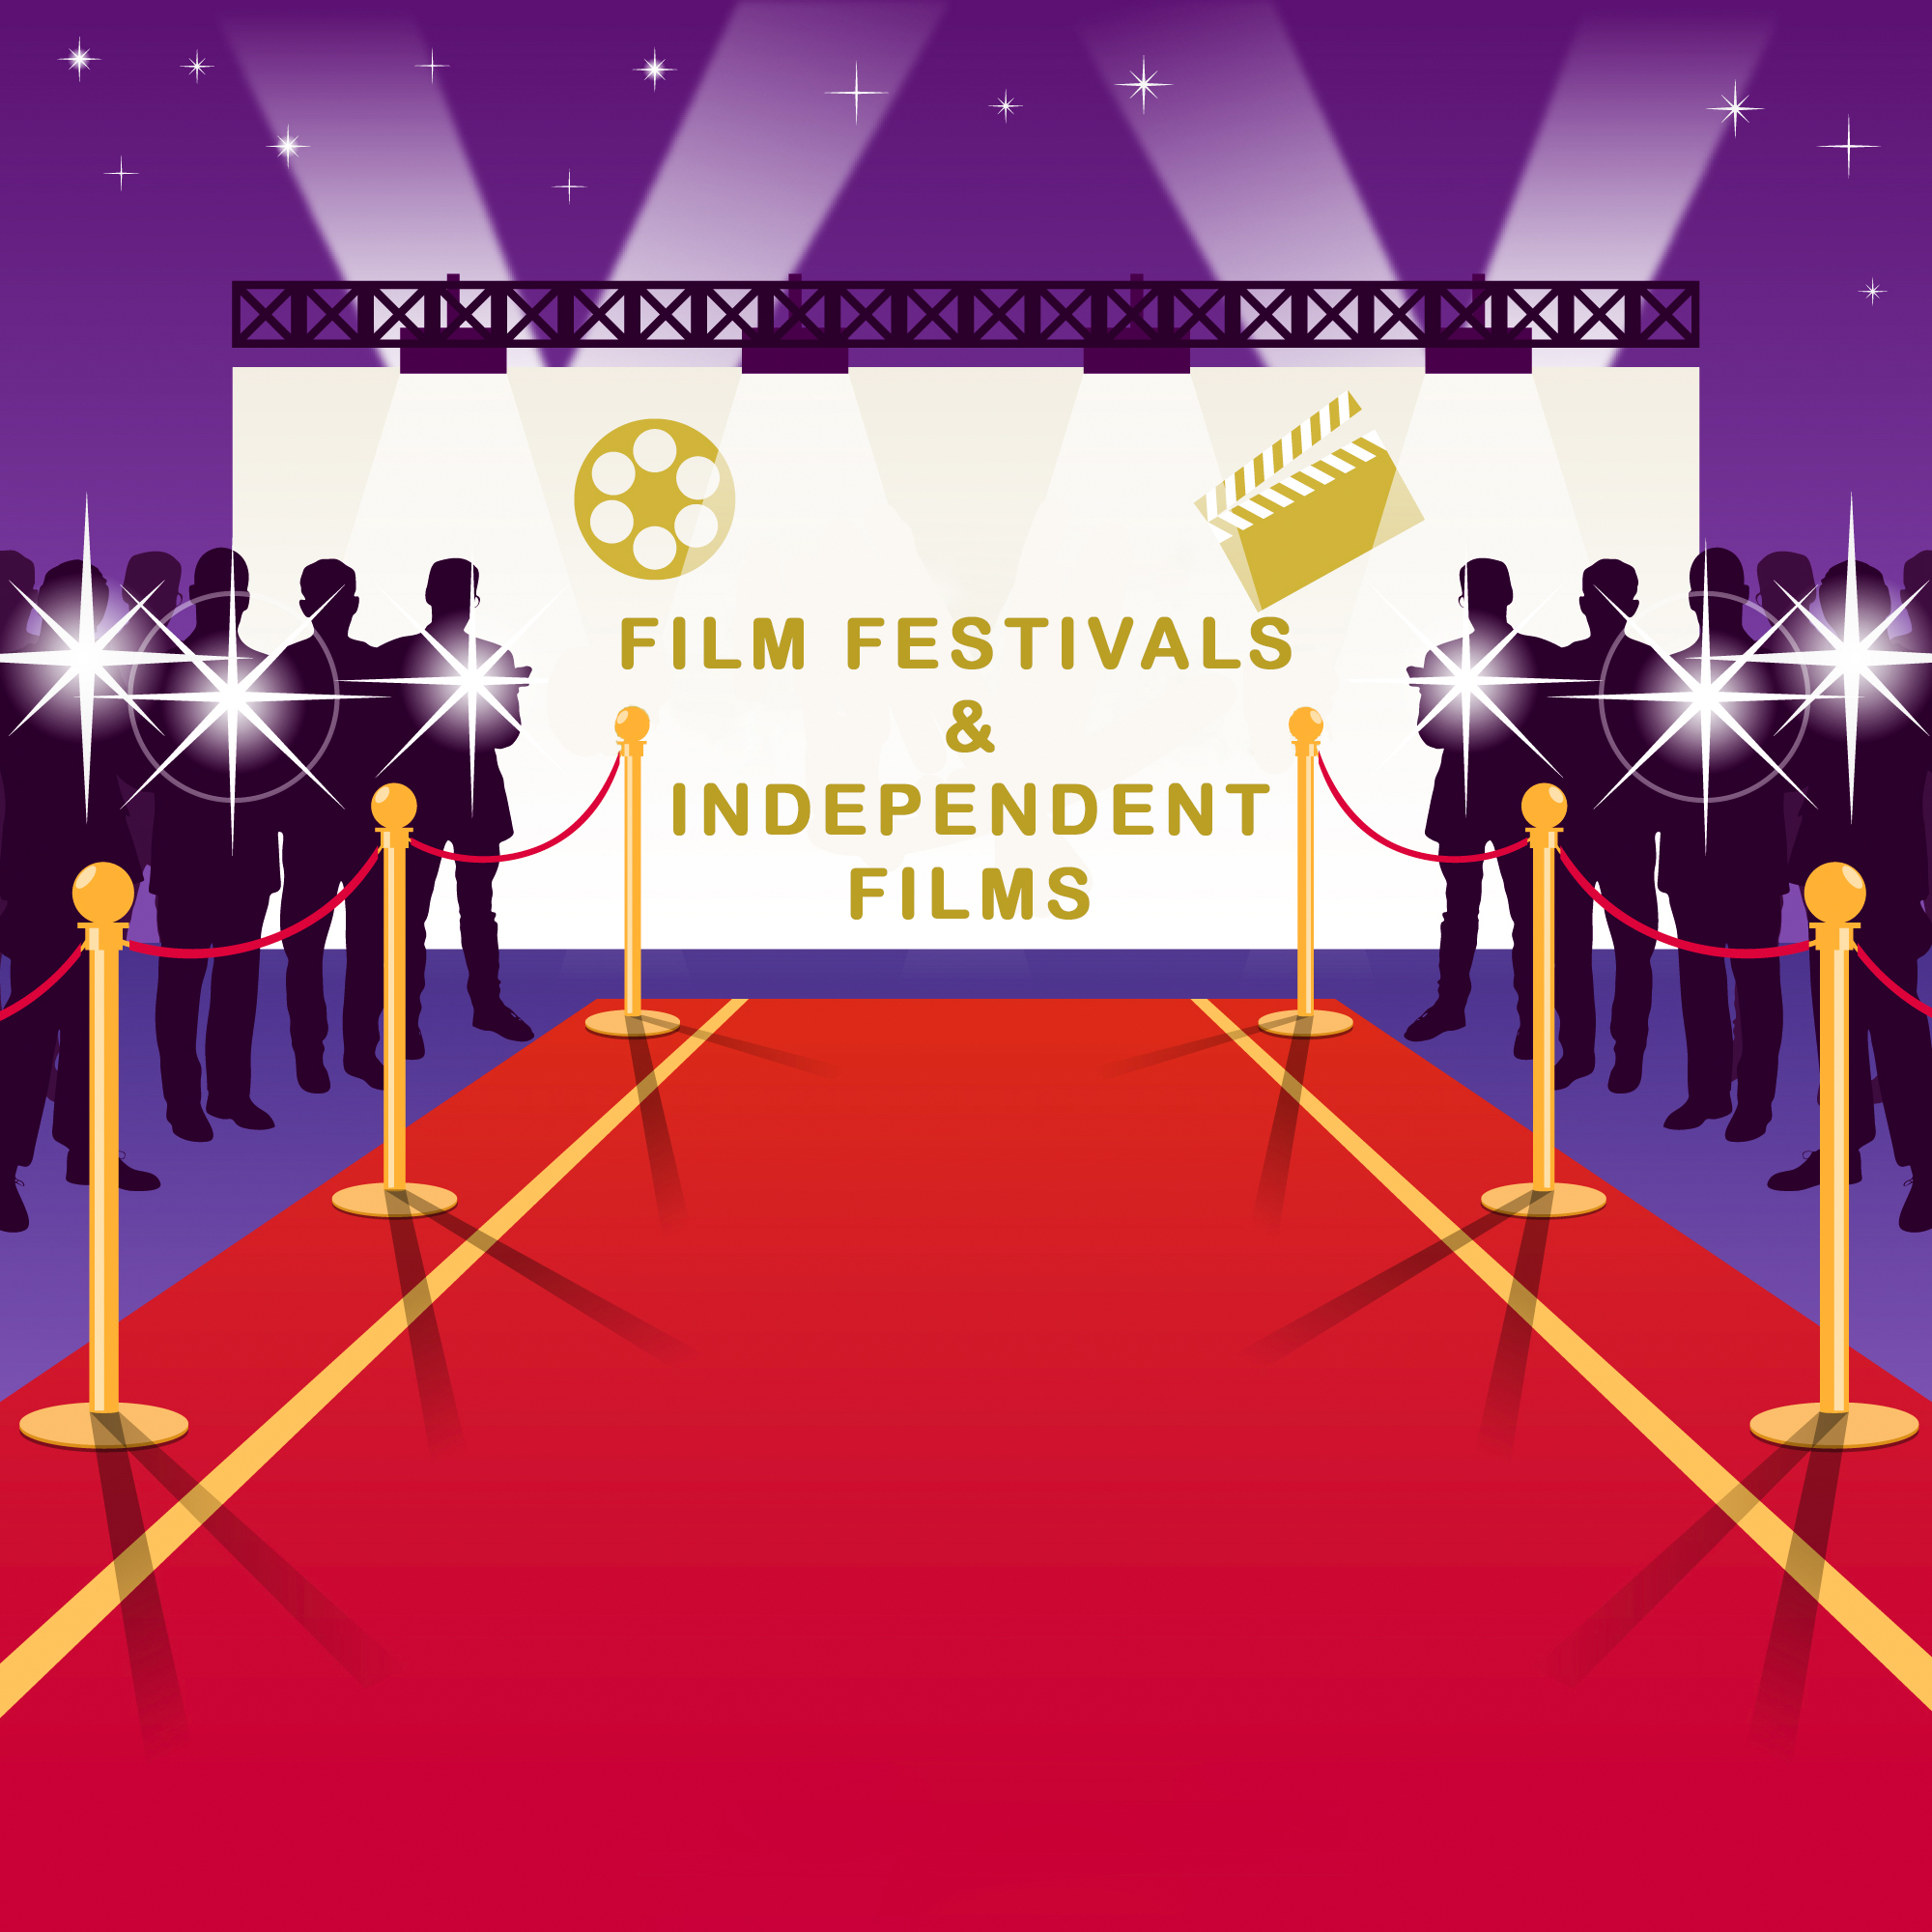 Importance of Film Festivals in the context of Independent Films